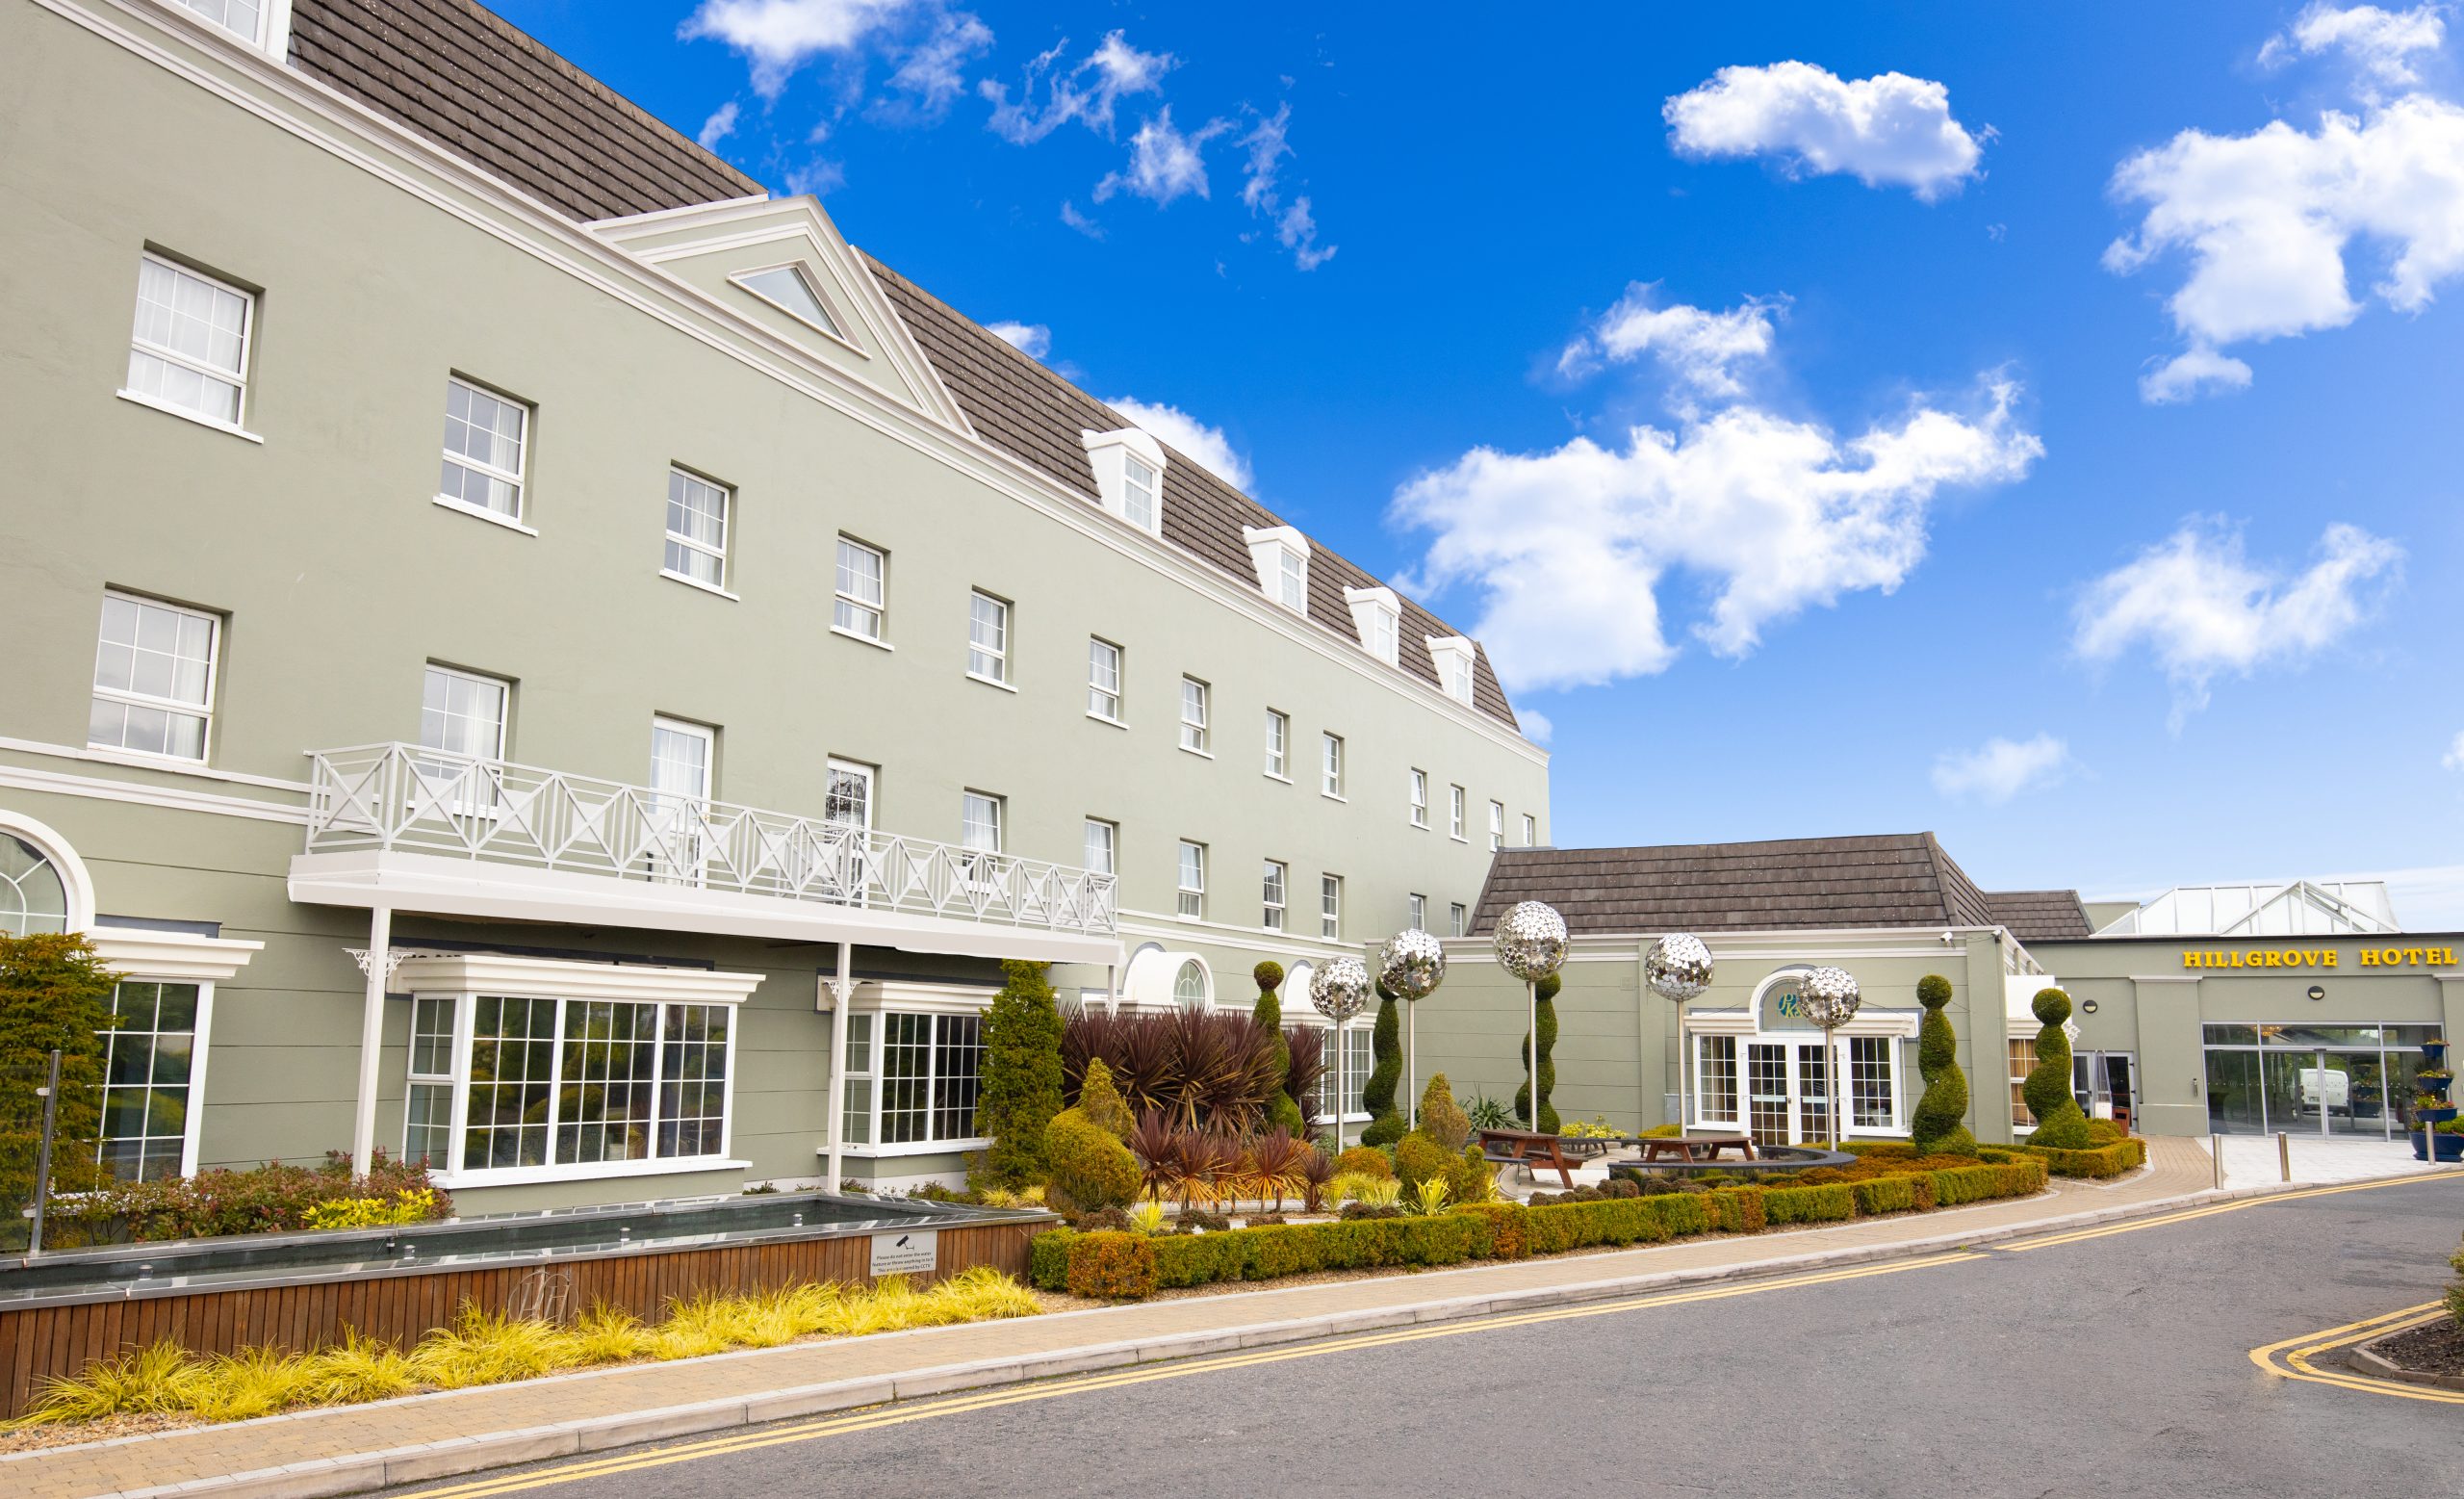 Hillgrove Hotel & Spa Monaghan | The iNUA Collection